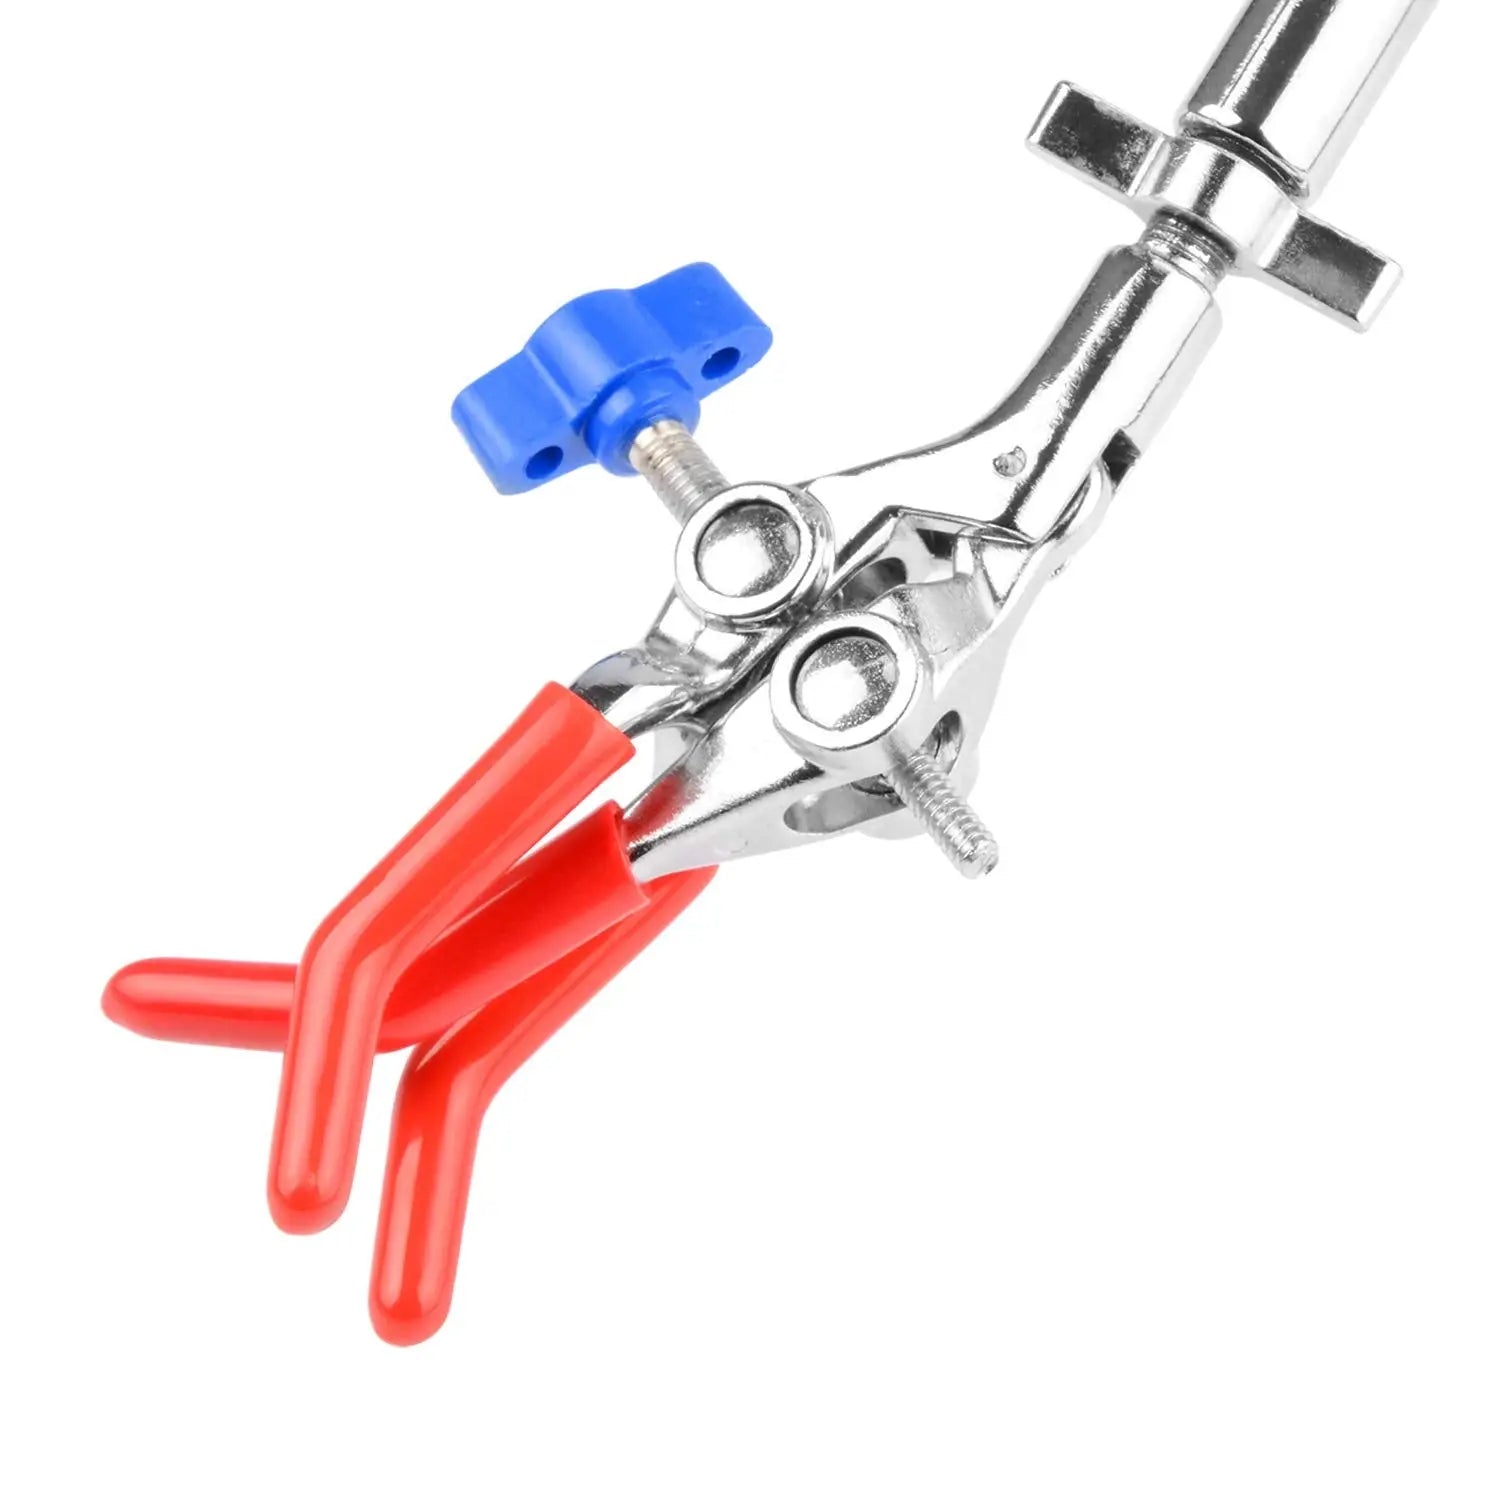 3 Prong Swivel Clamp, with Boss Head Clamps